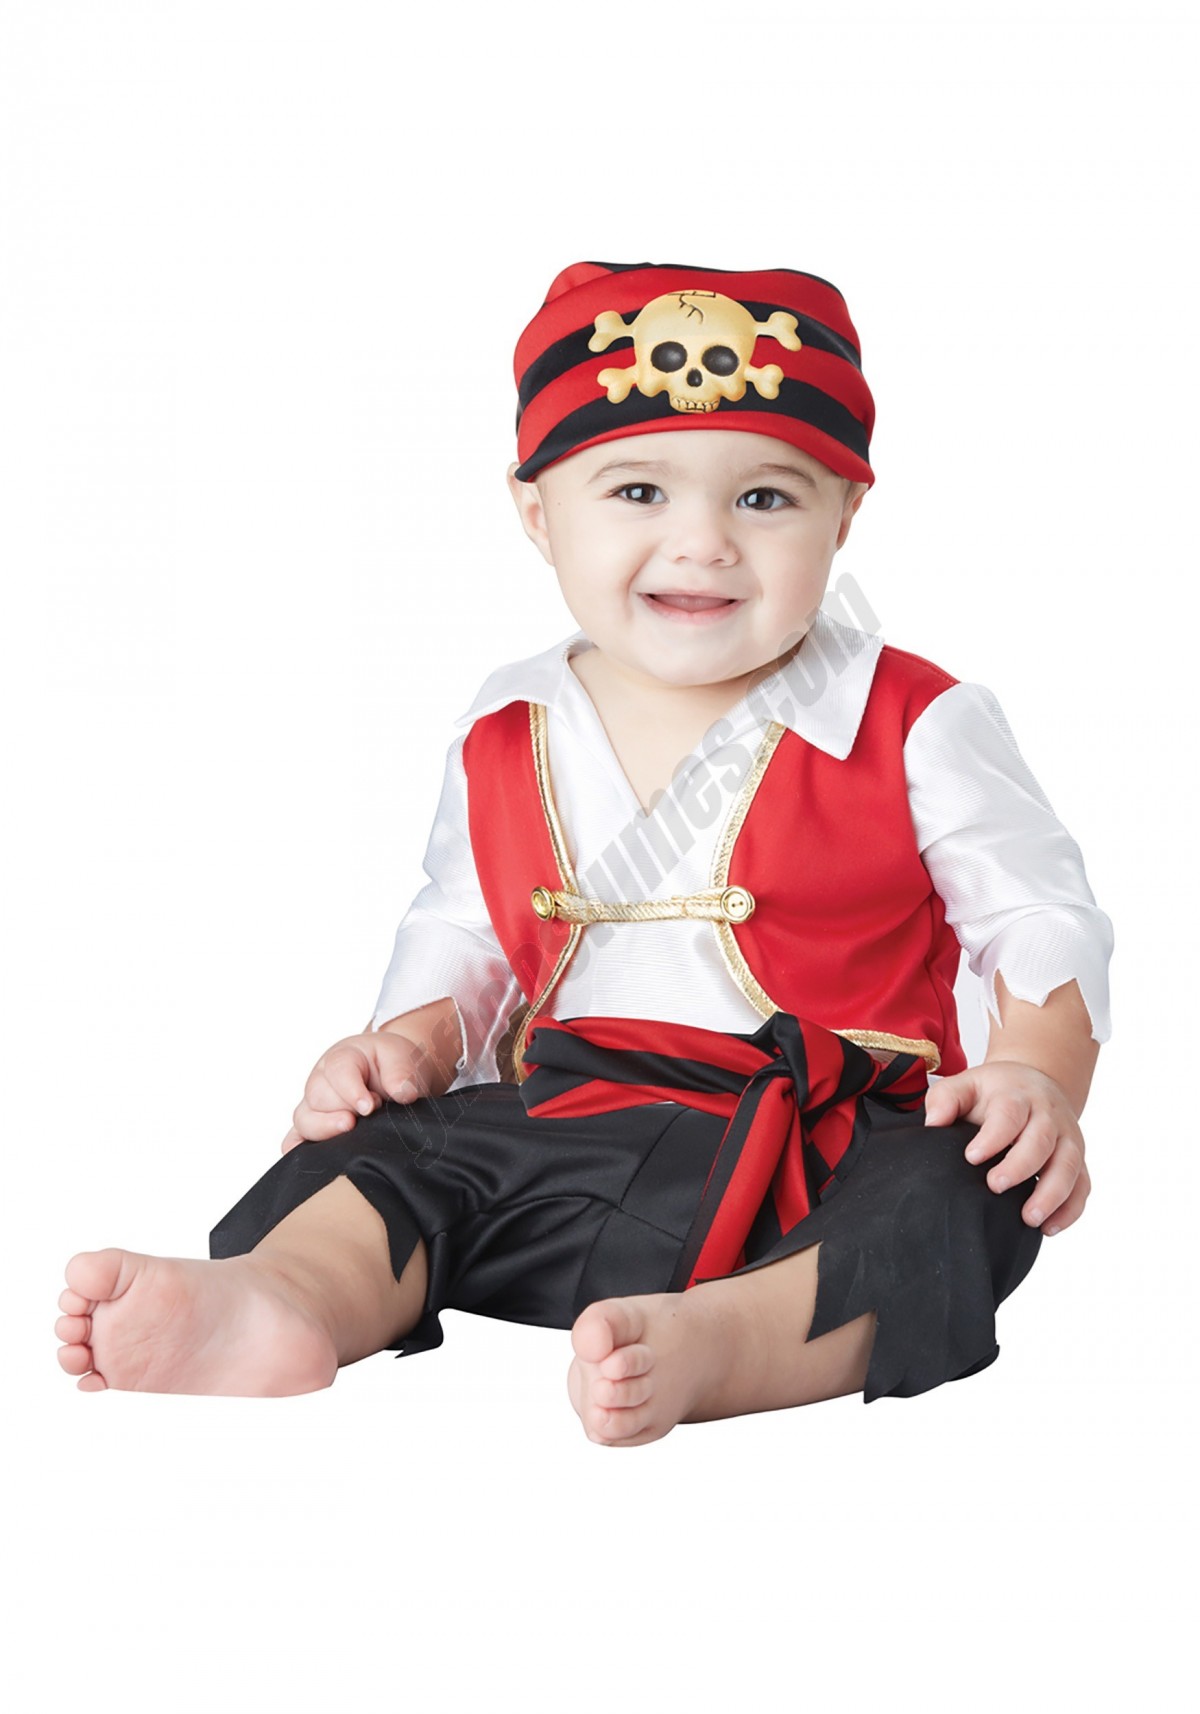 Pee Wee Pirate Costume for Infants Promotions - -0